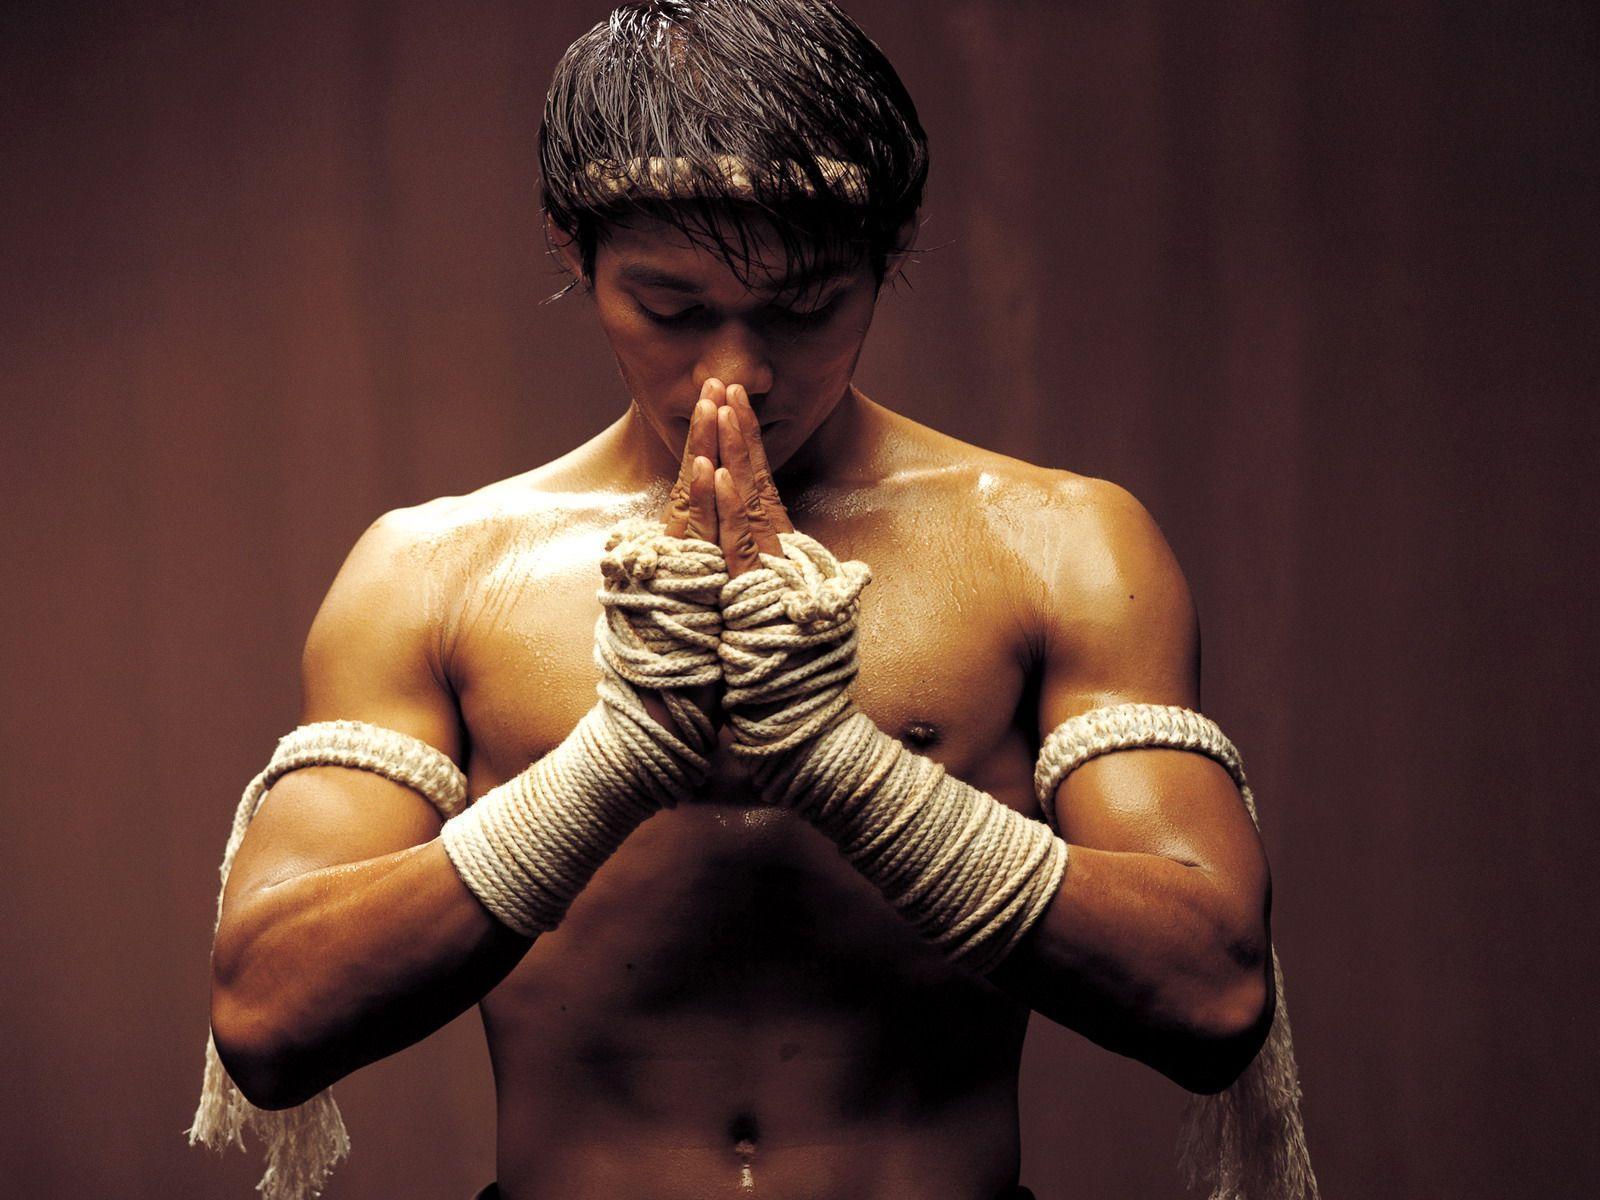 Ong Bak Wallpaper And Image, Picture, Photo